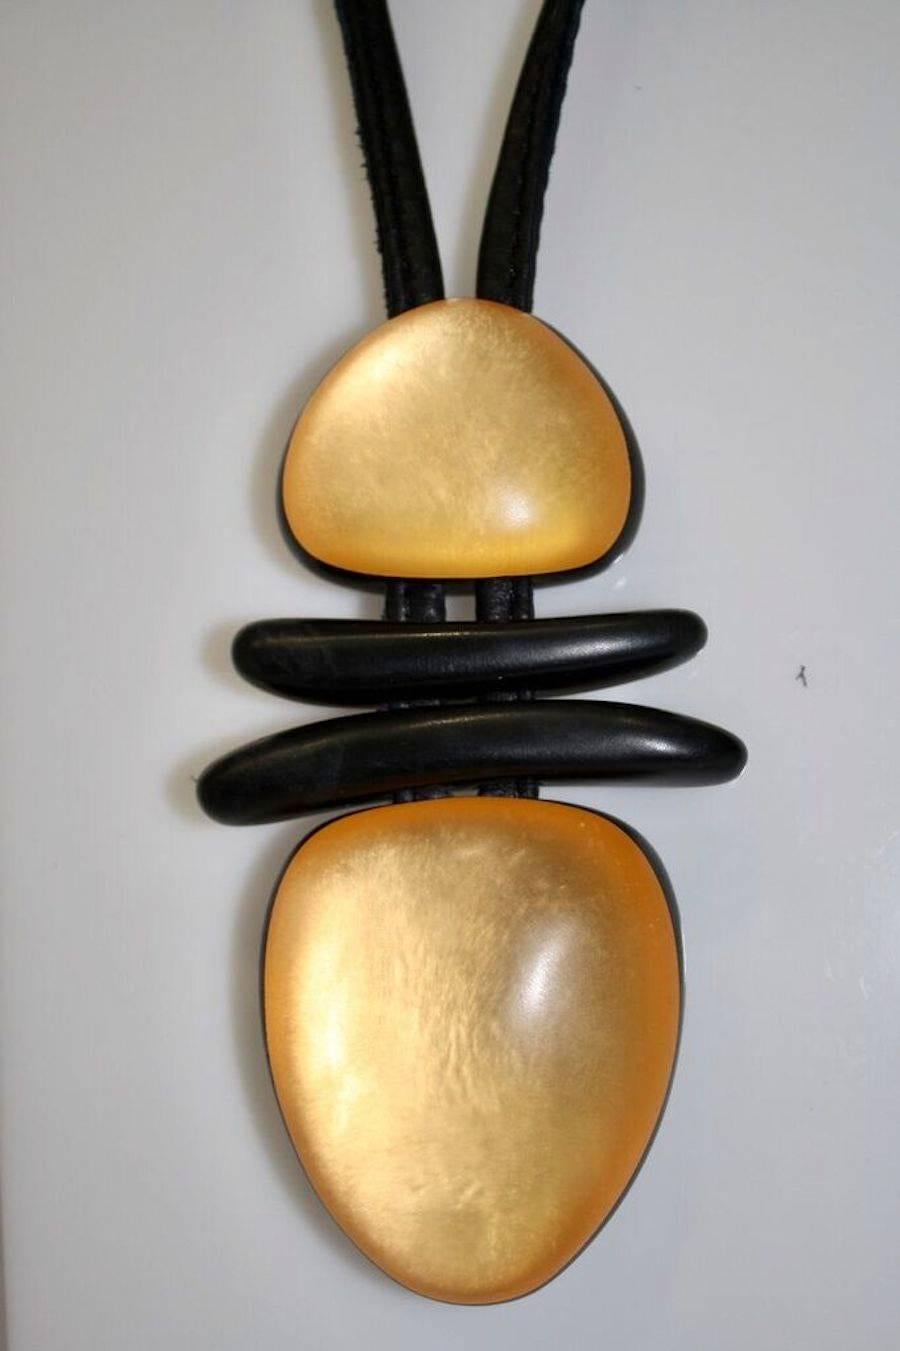 Gold acrylic, ebony wood, and leather pendant necklace from Monies. 

Leather is 24